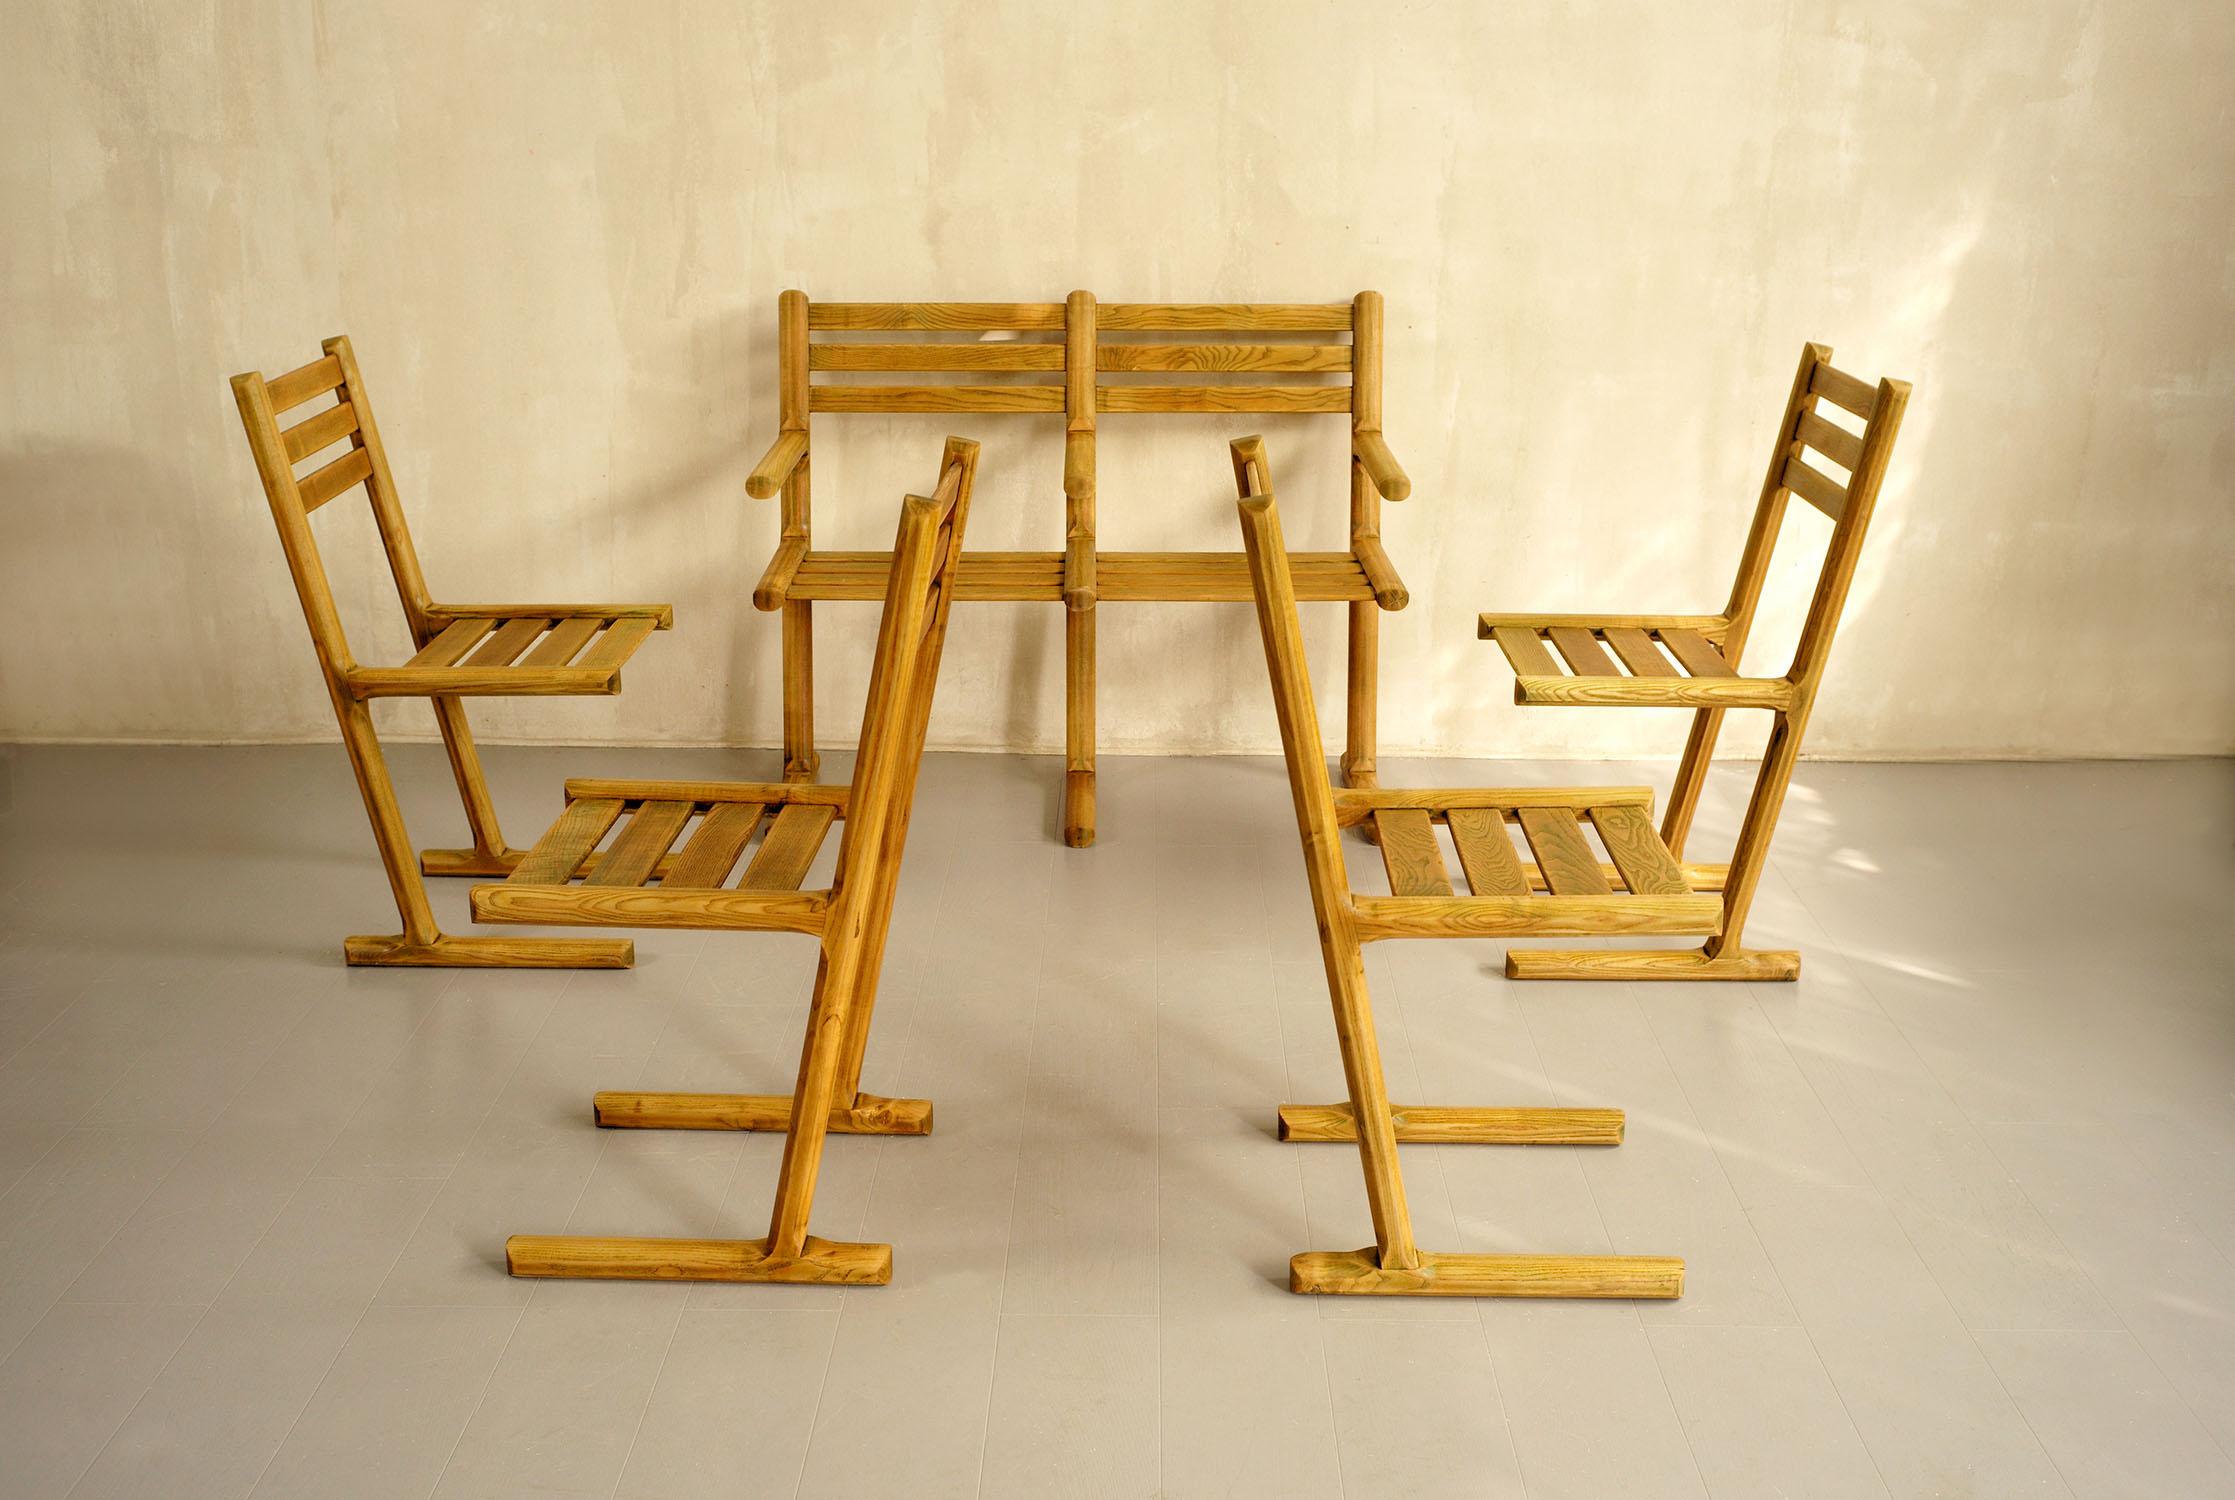 Set of 4 Chairs and 1 Wooden Bench, France, 1960 For Sale 3